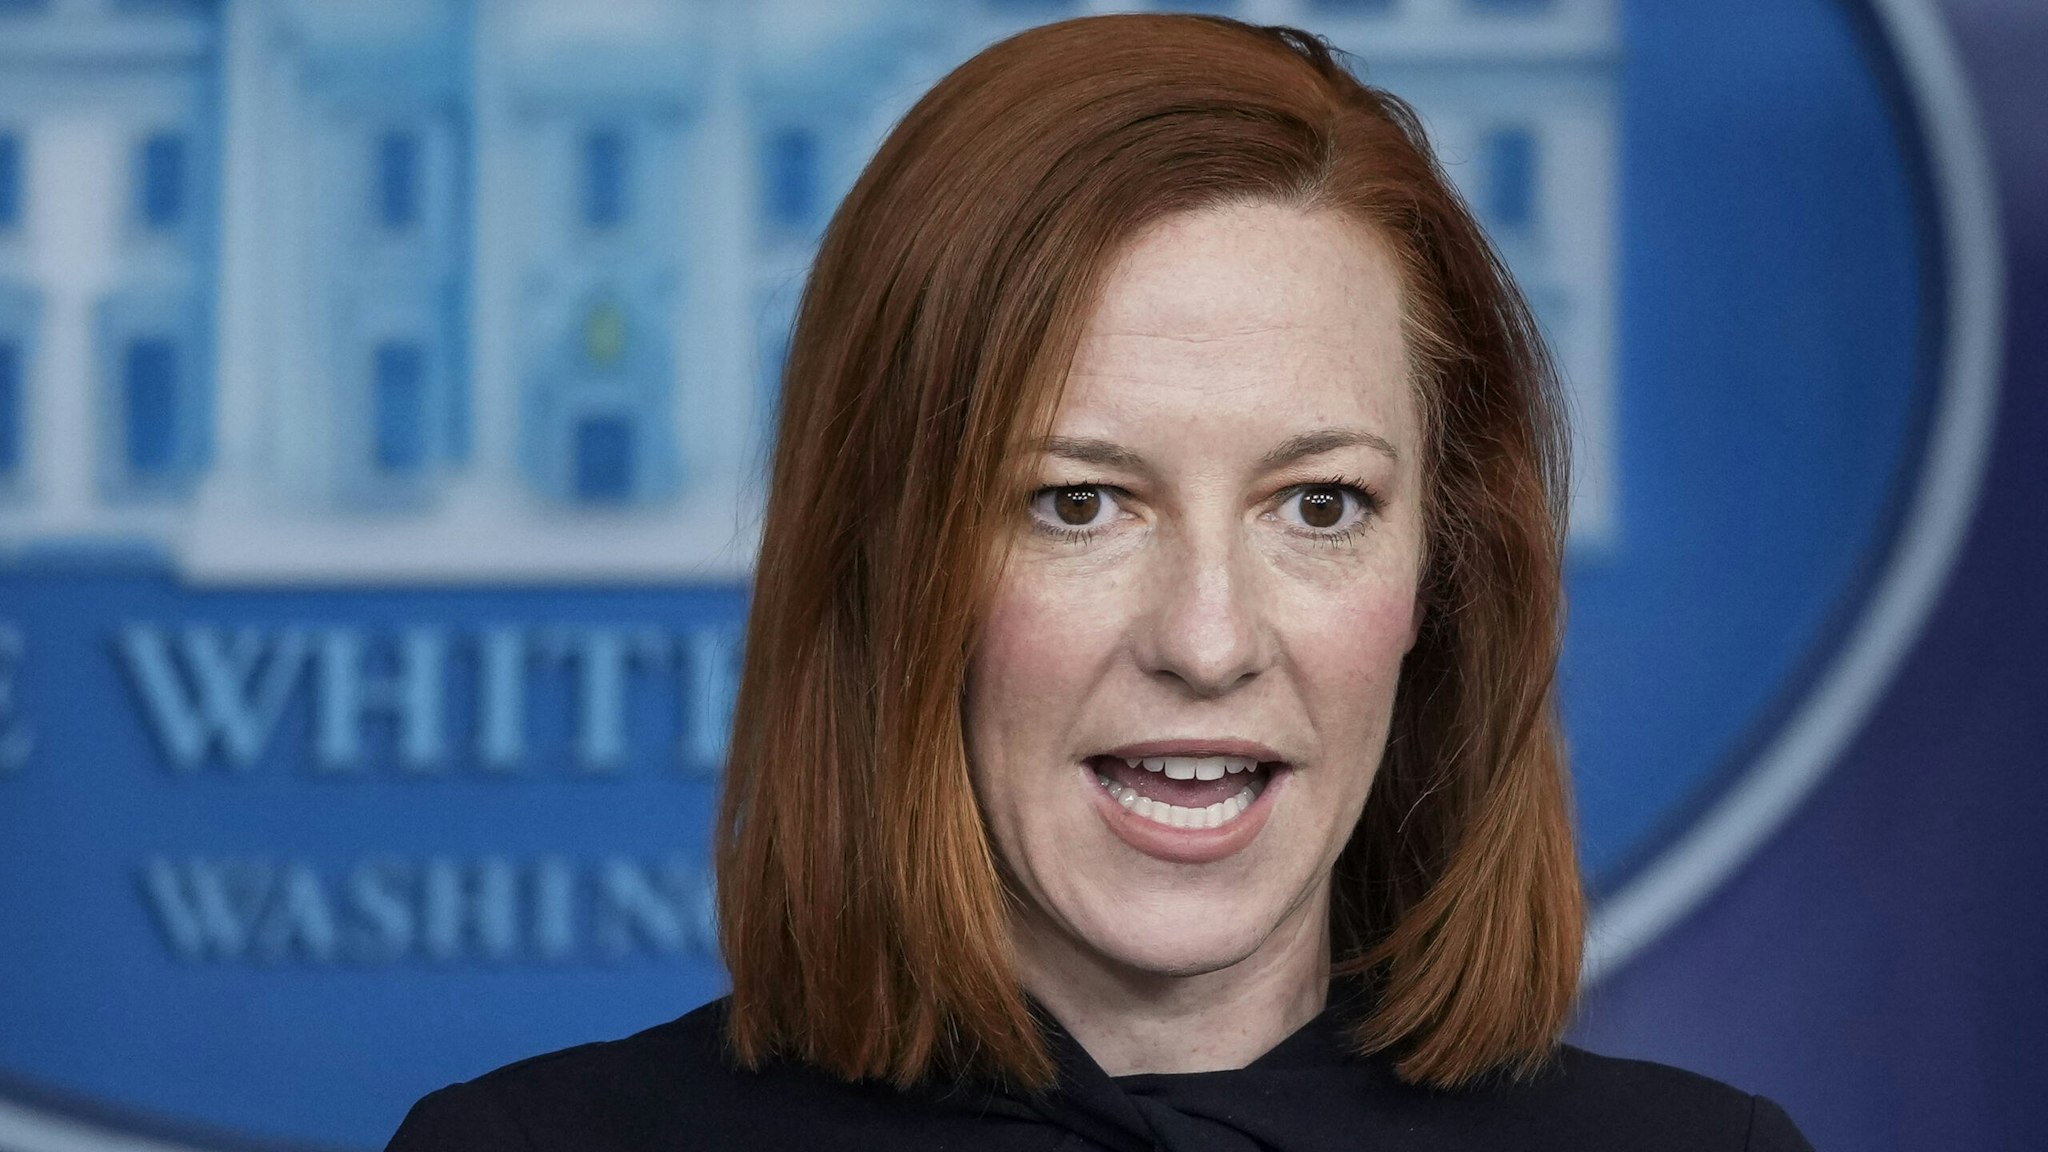 WASHINGTON, DC - MARCH 1: White House Press Secretary Jen Psaki speaks before introducing Secretary of Homeland Security Alejandro Mayorkas during the daily press briefing at the White House on March 1, 2021 in Washington, DC. Mayorkas discussed the Biden administration's plans for overhauling immigration policy.